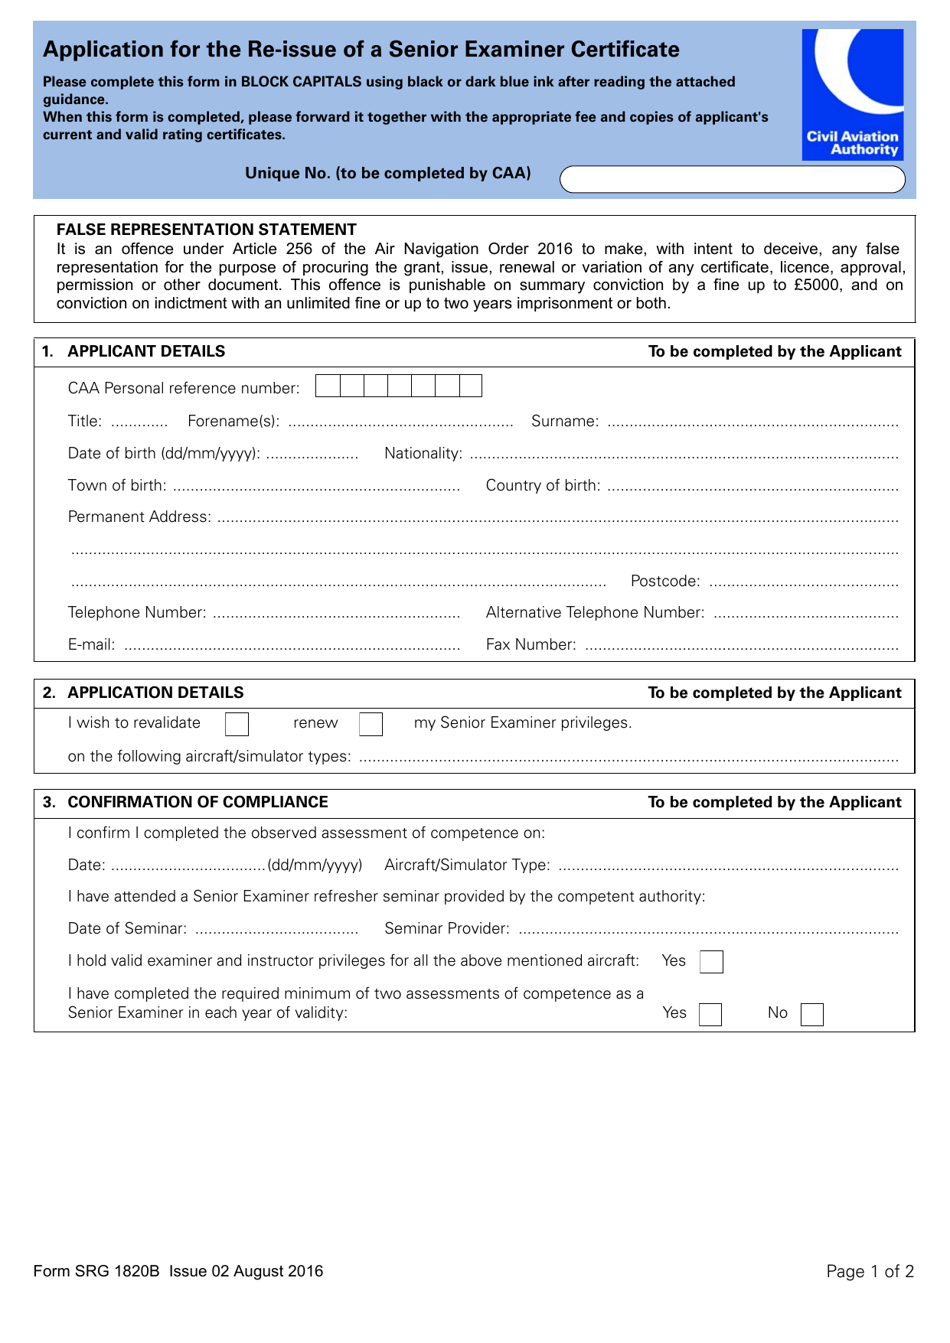 Form SRG1820B Application for the Re-issue of a Senior Examiner Certificate - United Kingdom, Page 1